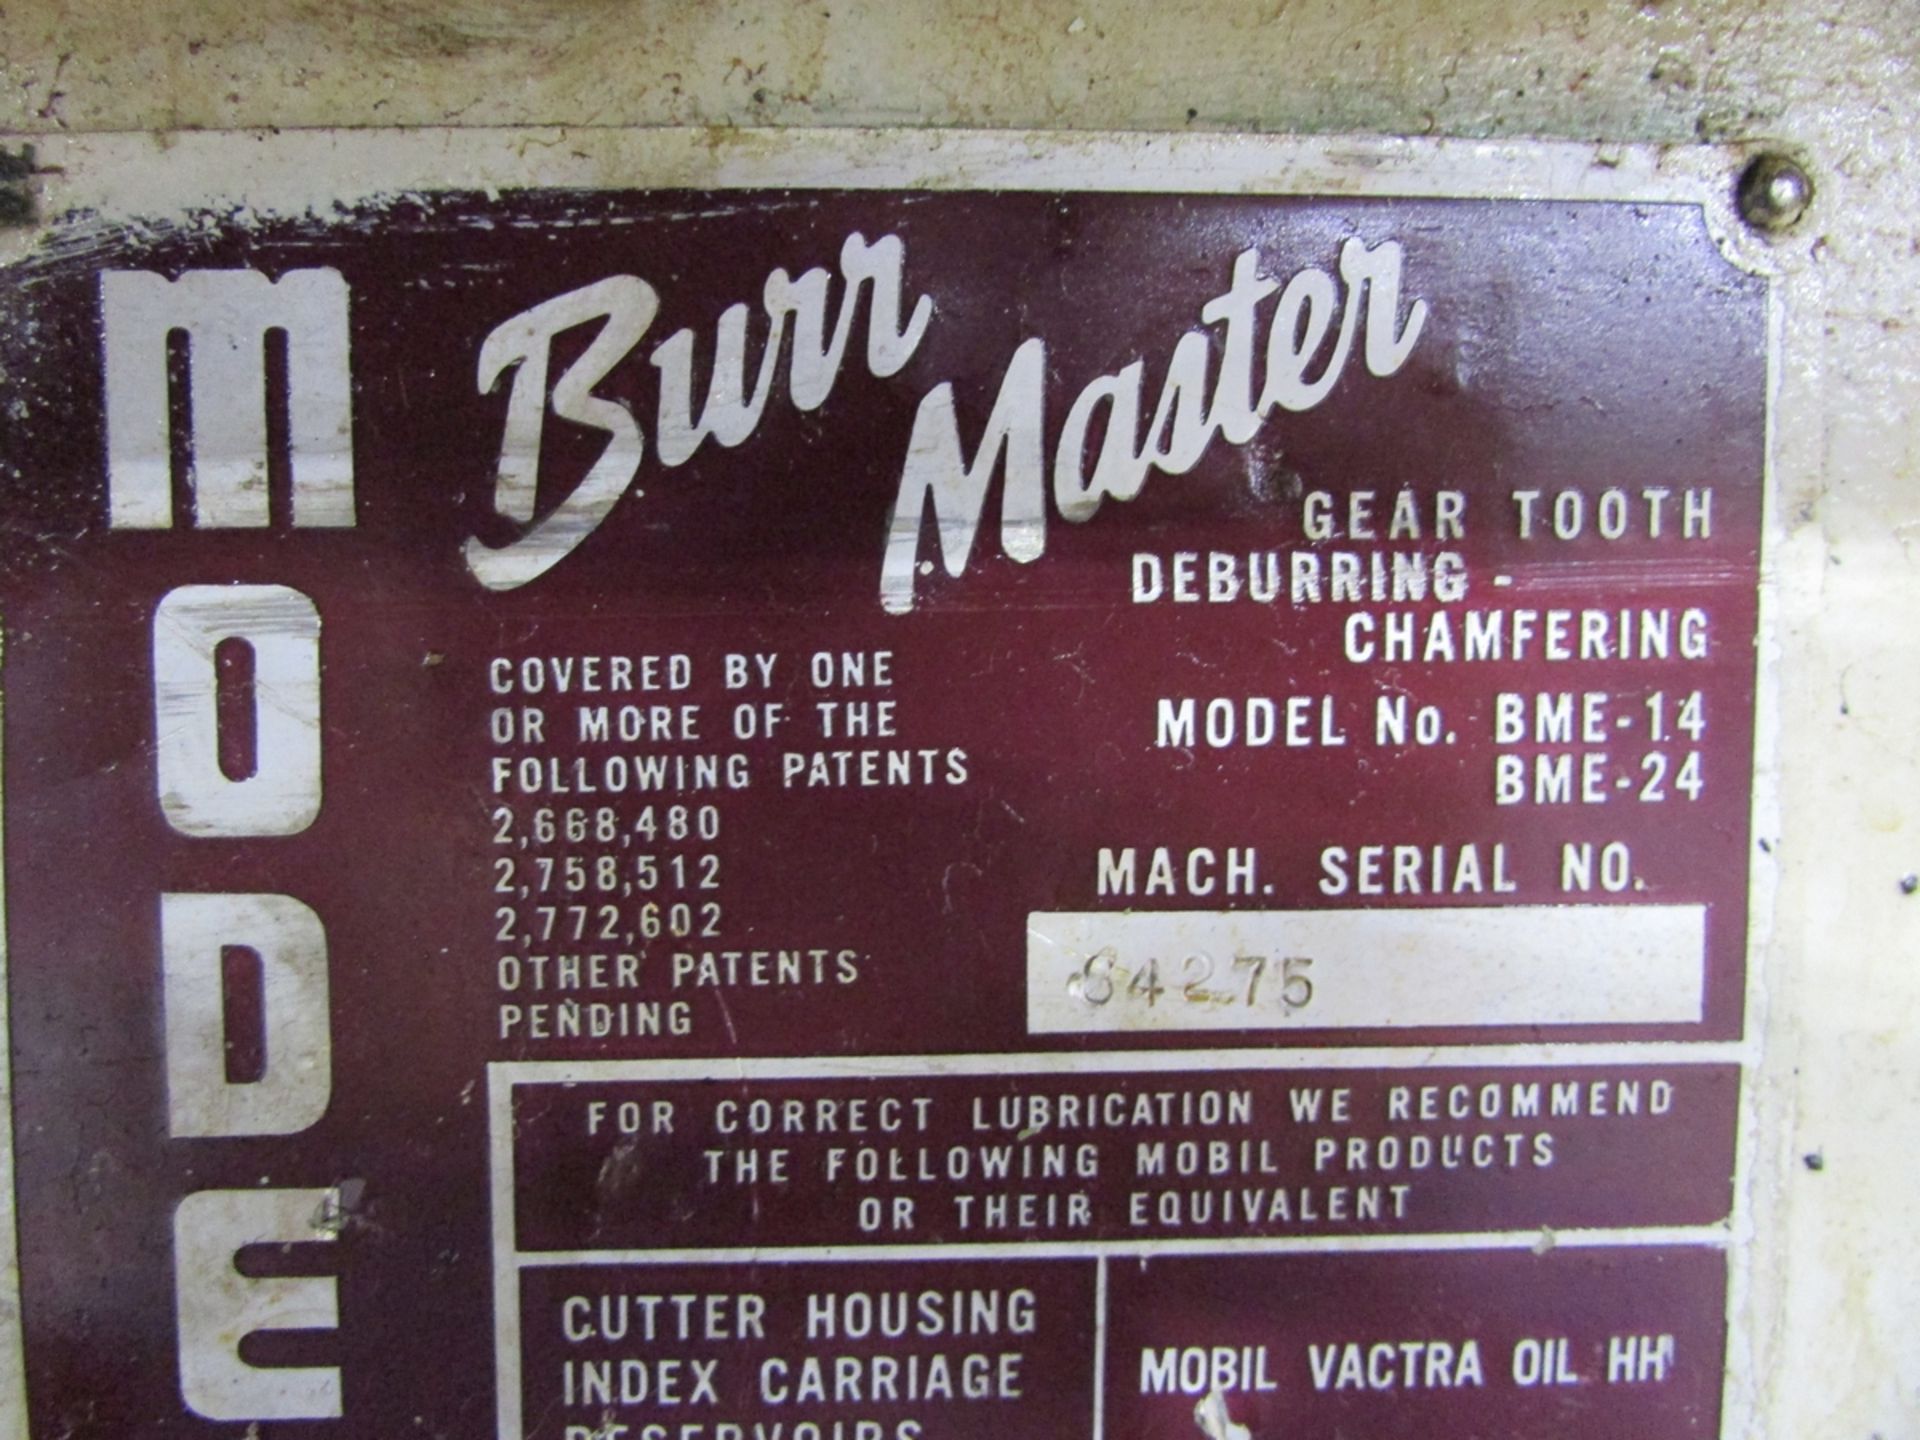 Modern Burr Master BMI-14 Gear Tooth and Spline Deburring and Chamfering Machine - Image 9 of 9